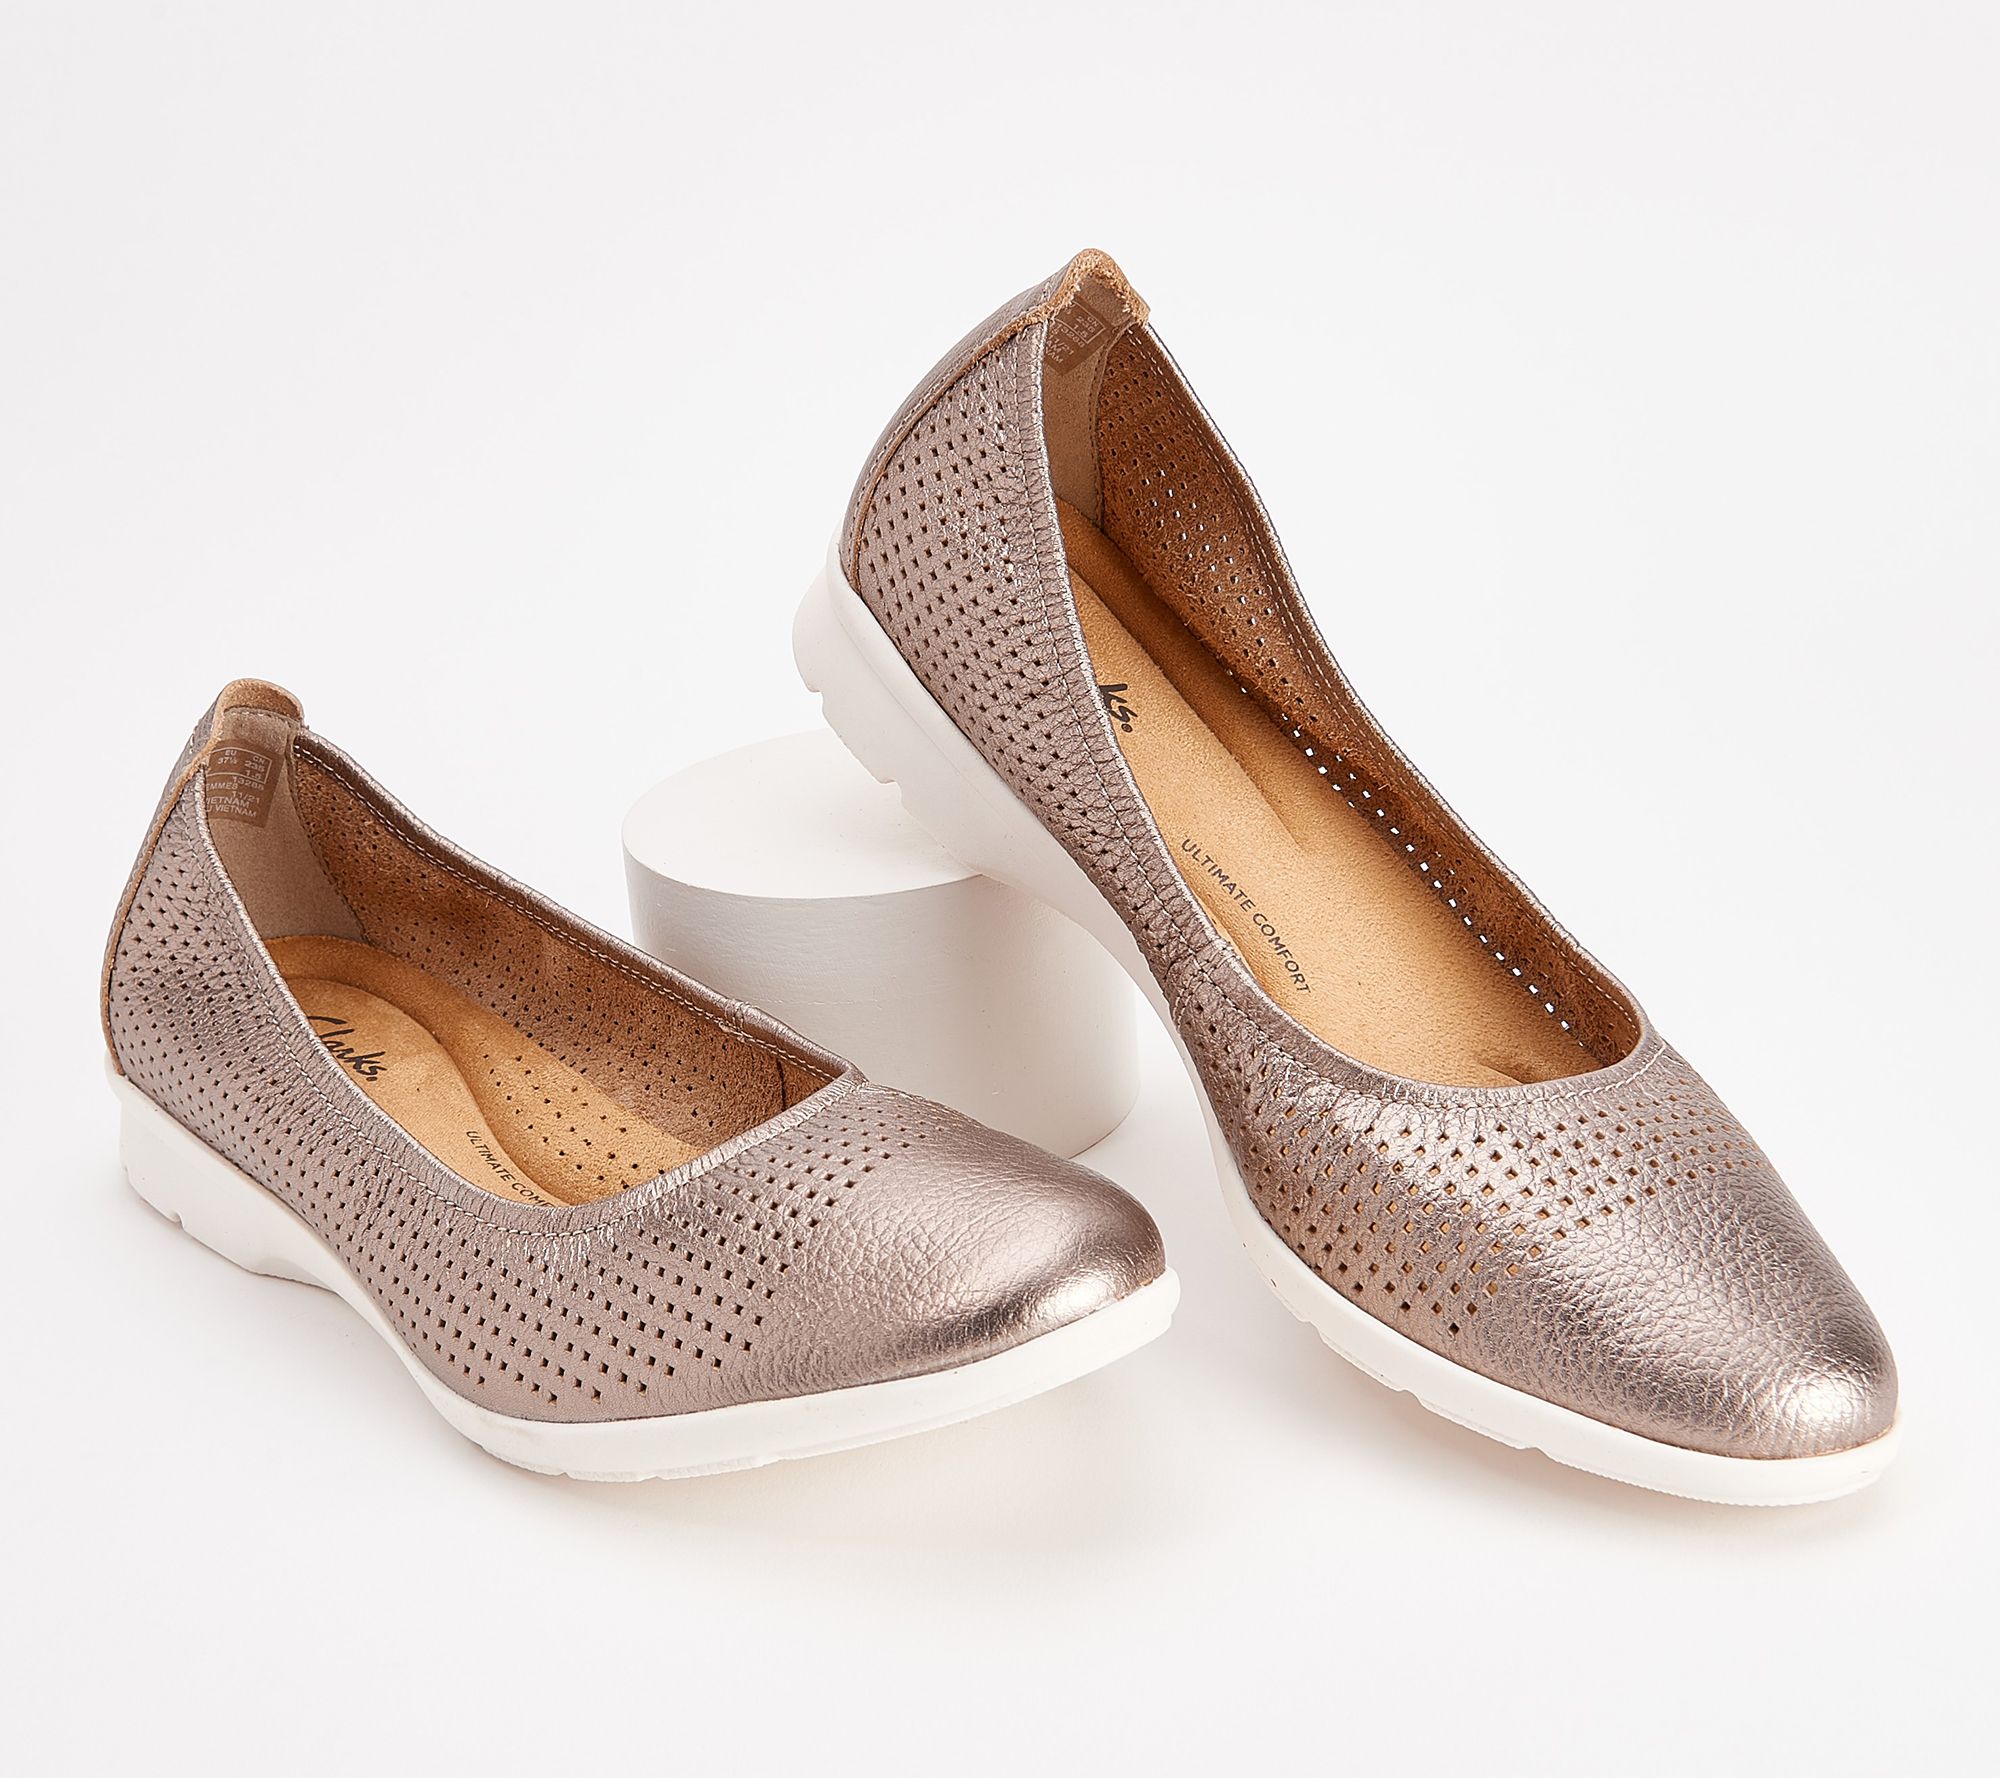 Clarks Collection Perforated Leather Flats - Ease - QVC.com